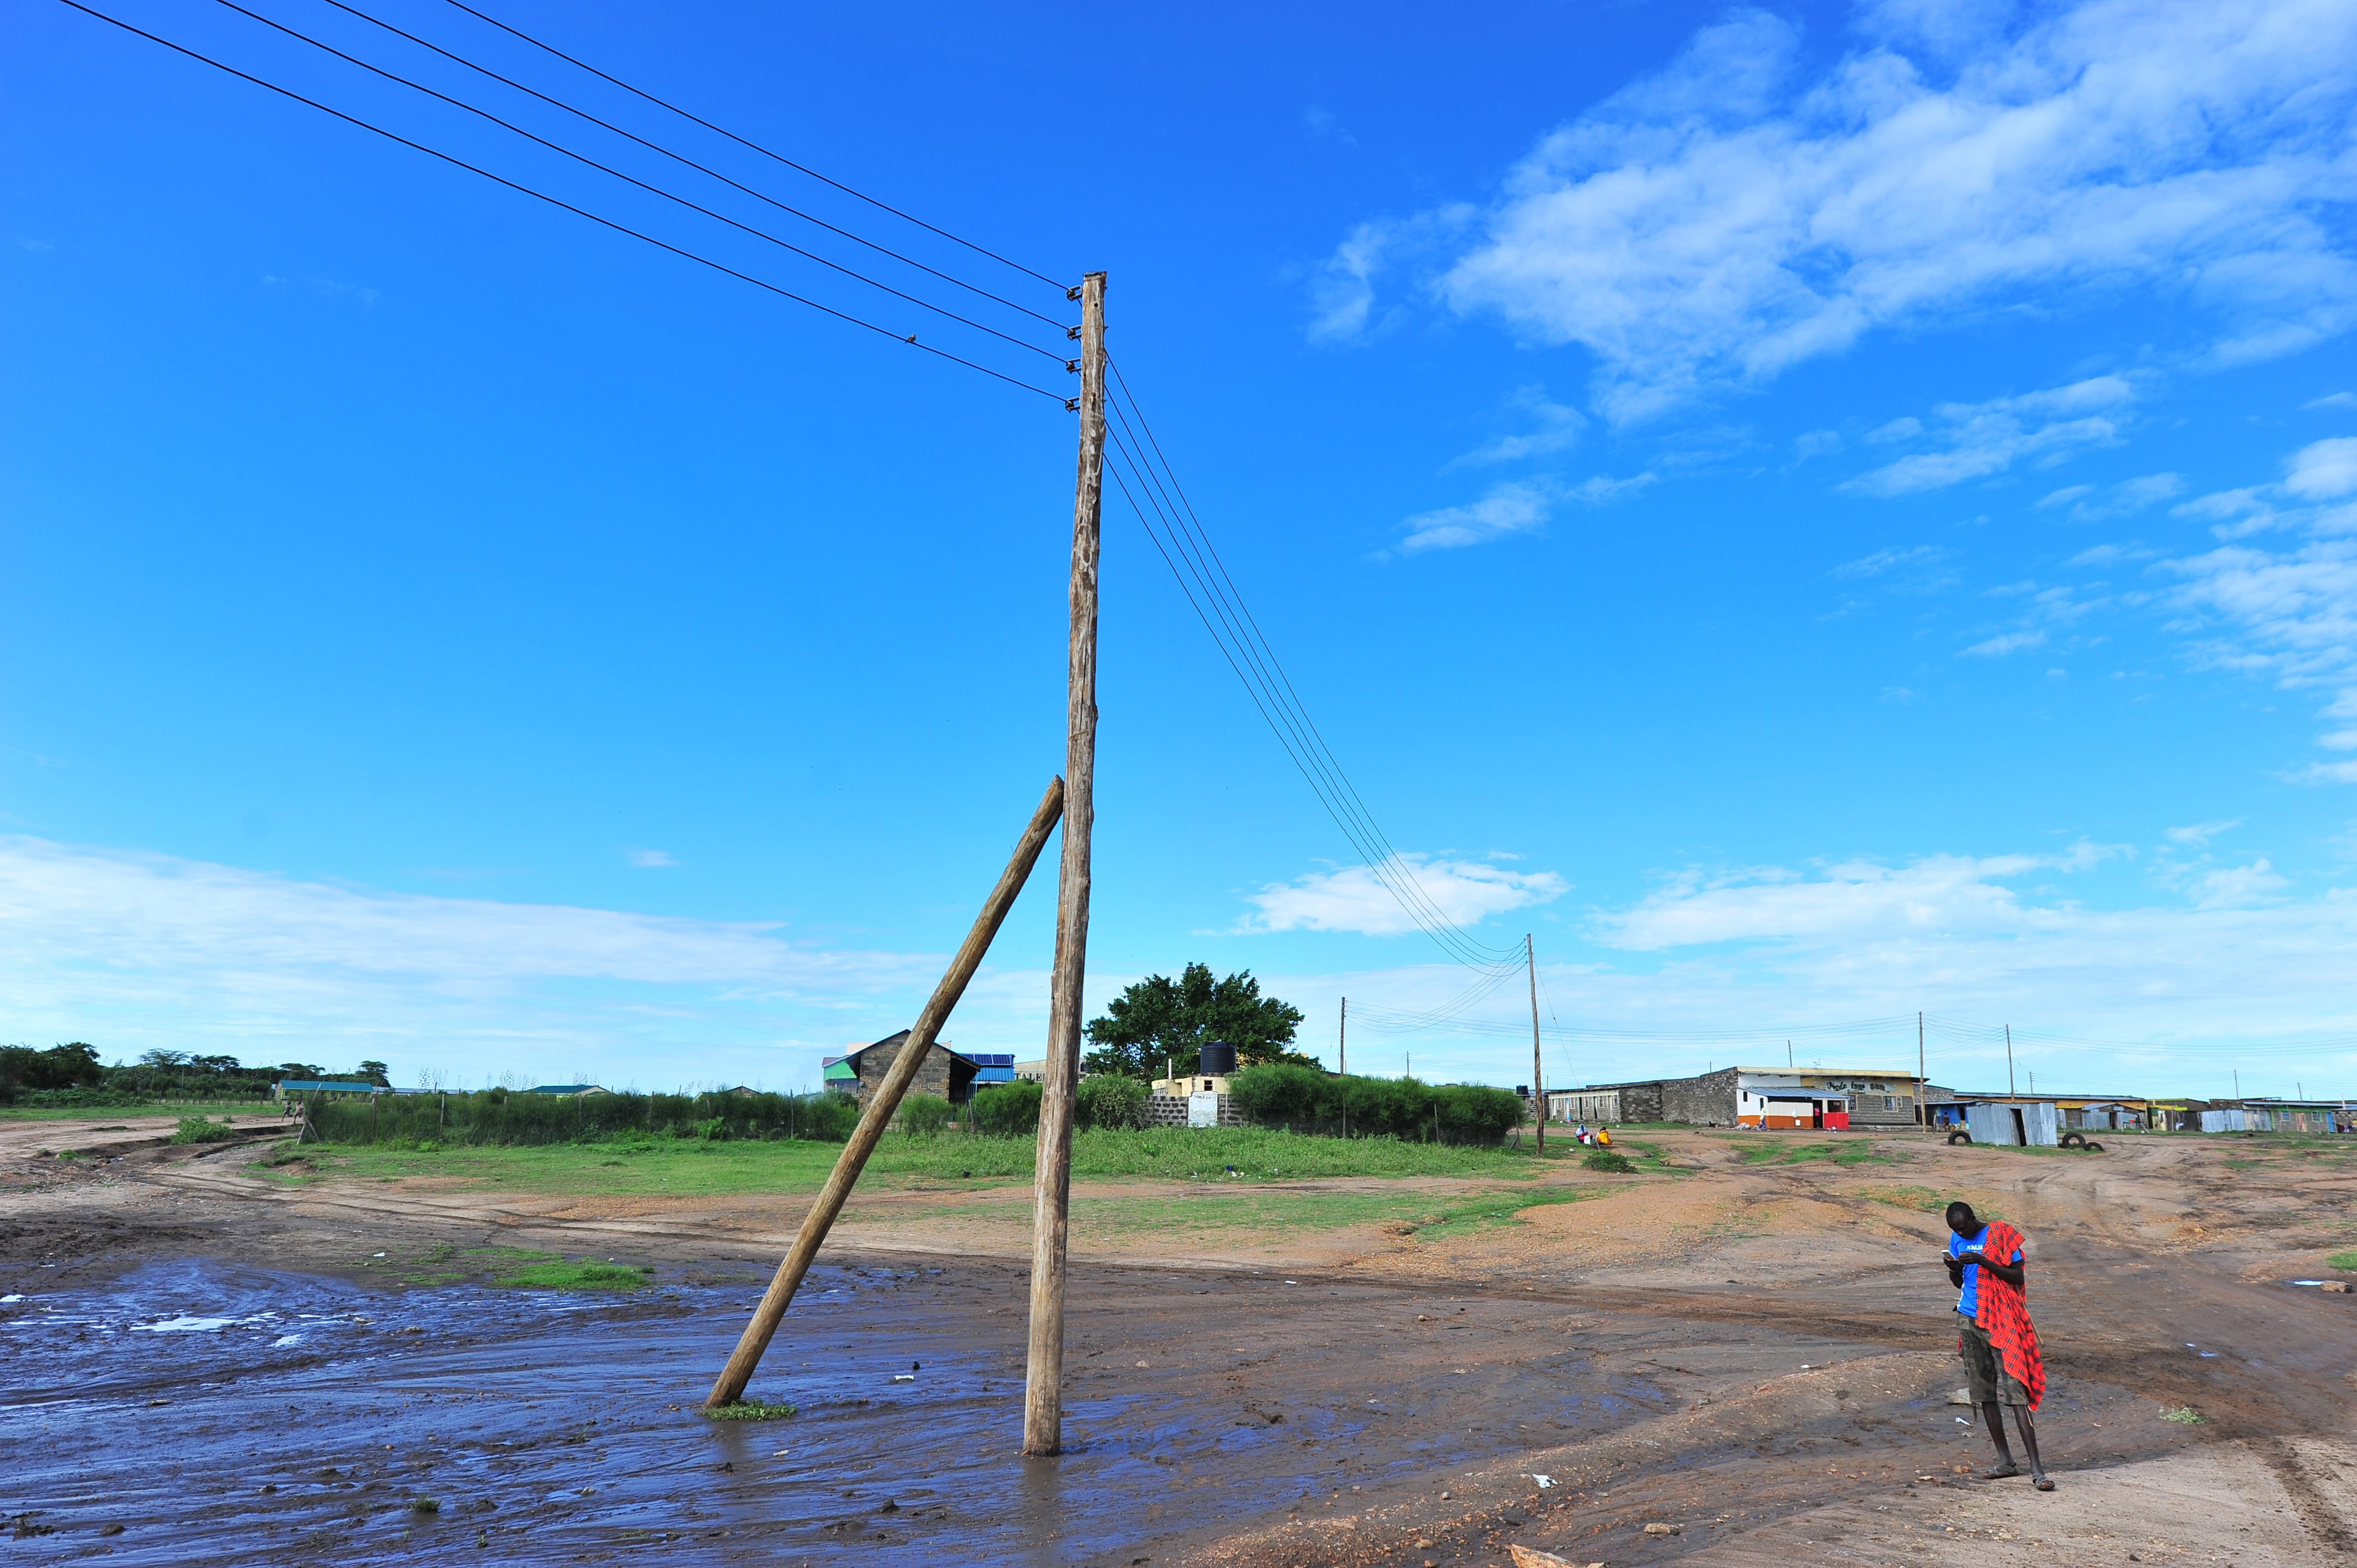 Complete power lines in Talek town. Through Talek Power, GIZ and other partners have constructed a solar power grid which will connect residents of Talek town in Narok to power for domestic and commercial use